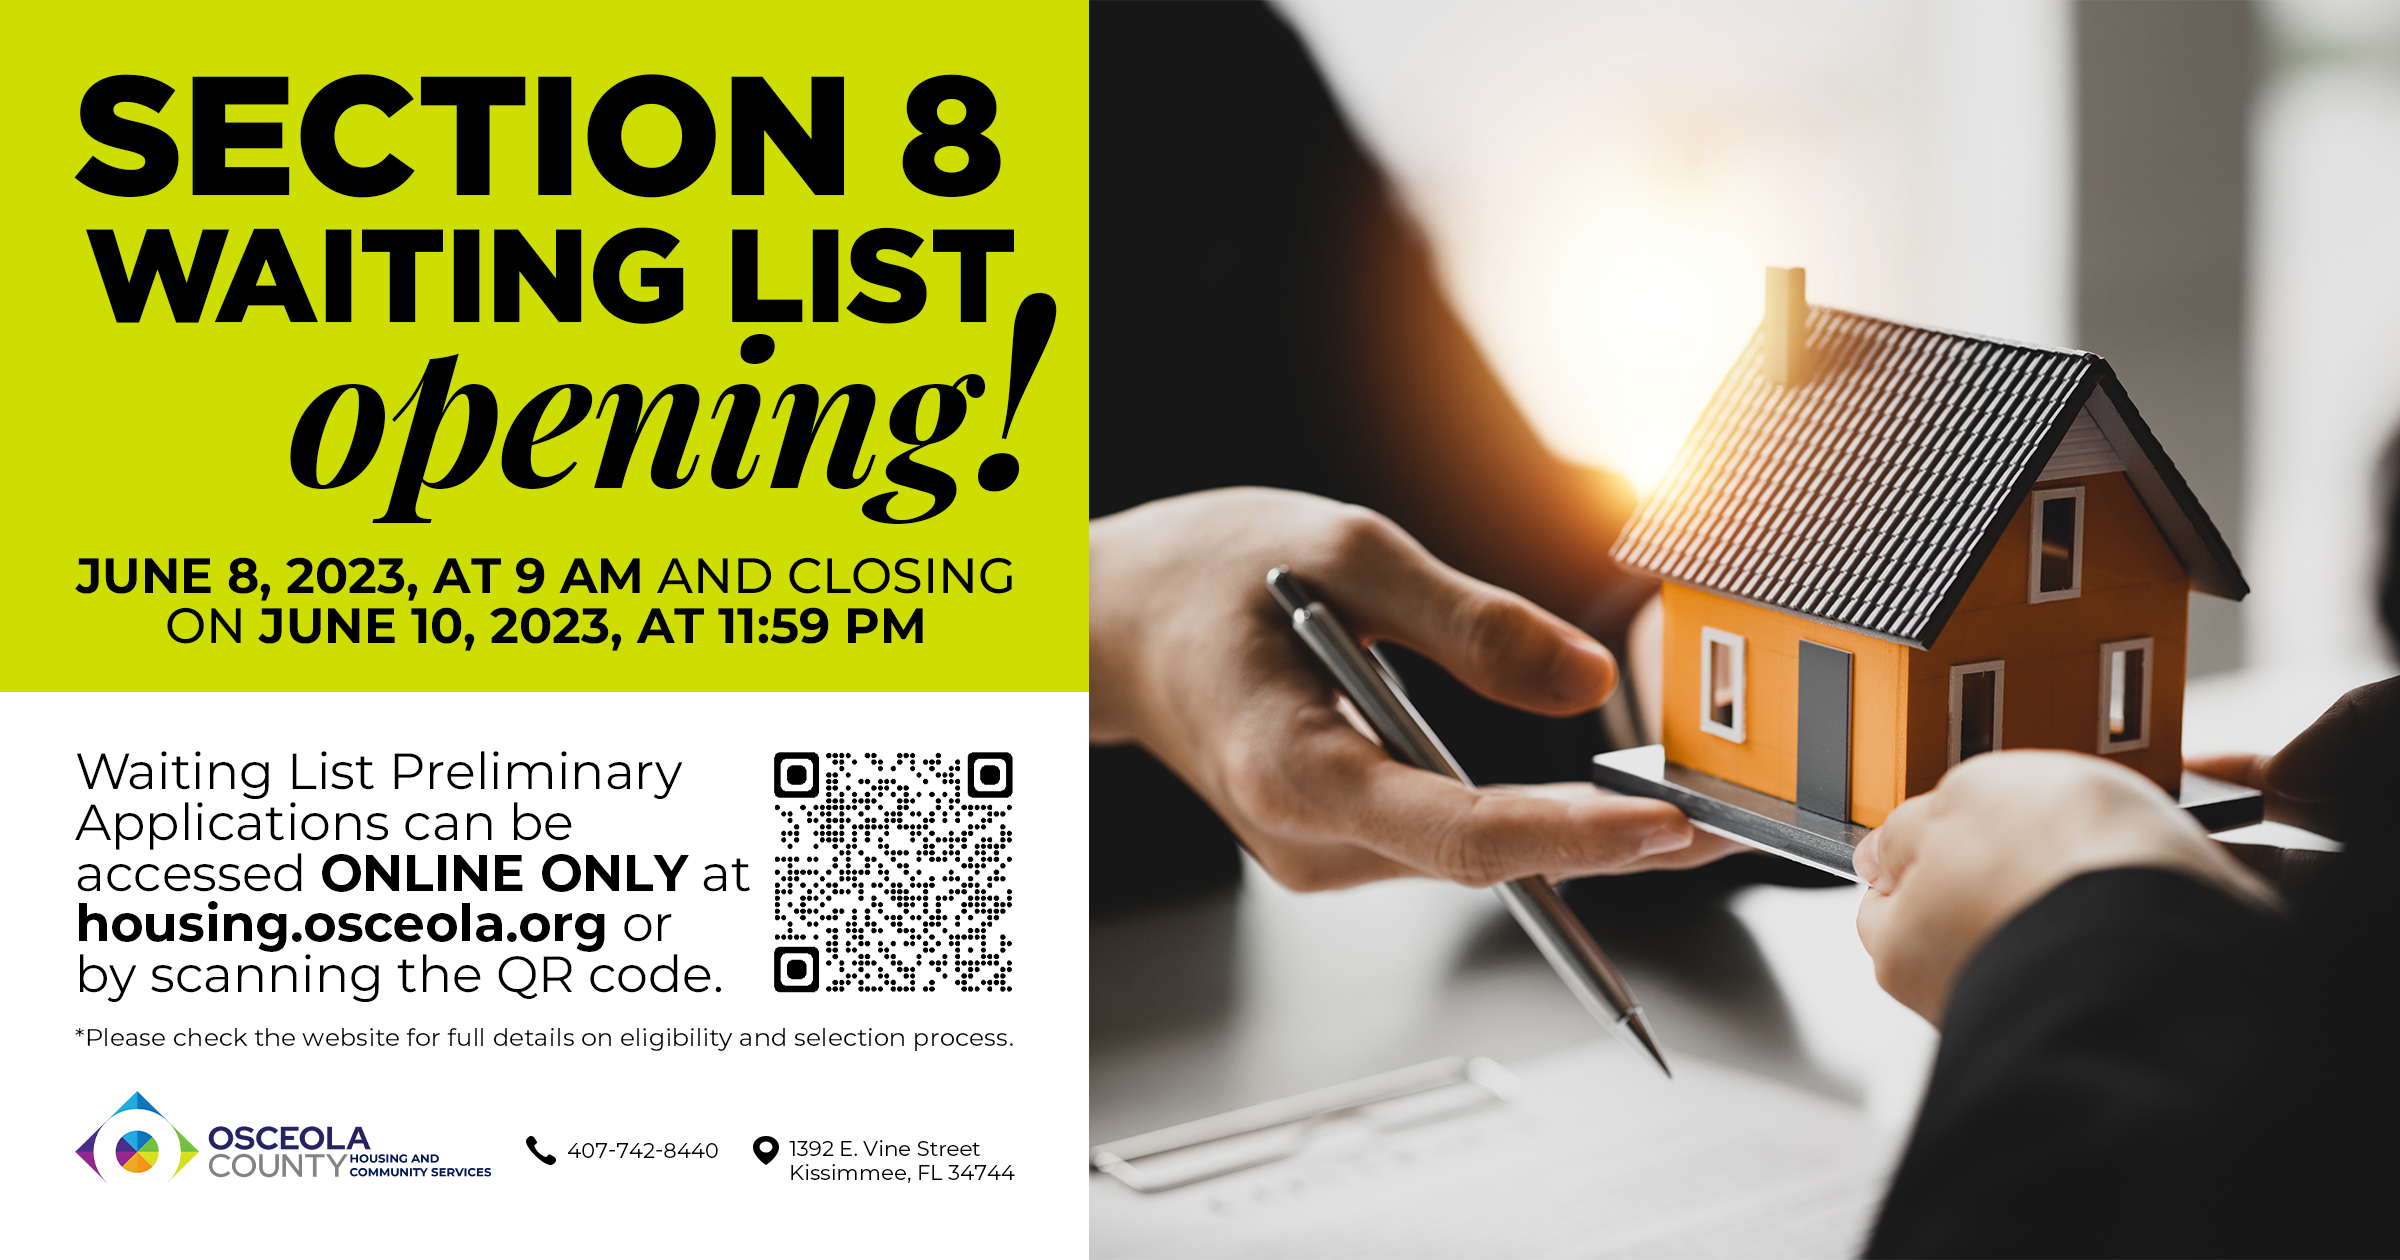 Section 8 waiting list opening! June 8, 2023 at 9am and closing on June 10 at 11:59pm. Waiting list preliminary applications be be accessed ONLINE ONLY at housing.osceola.org